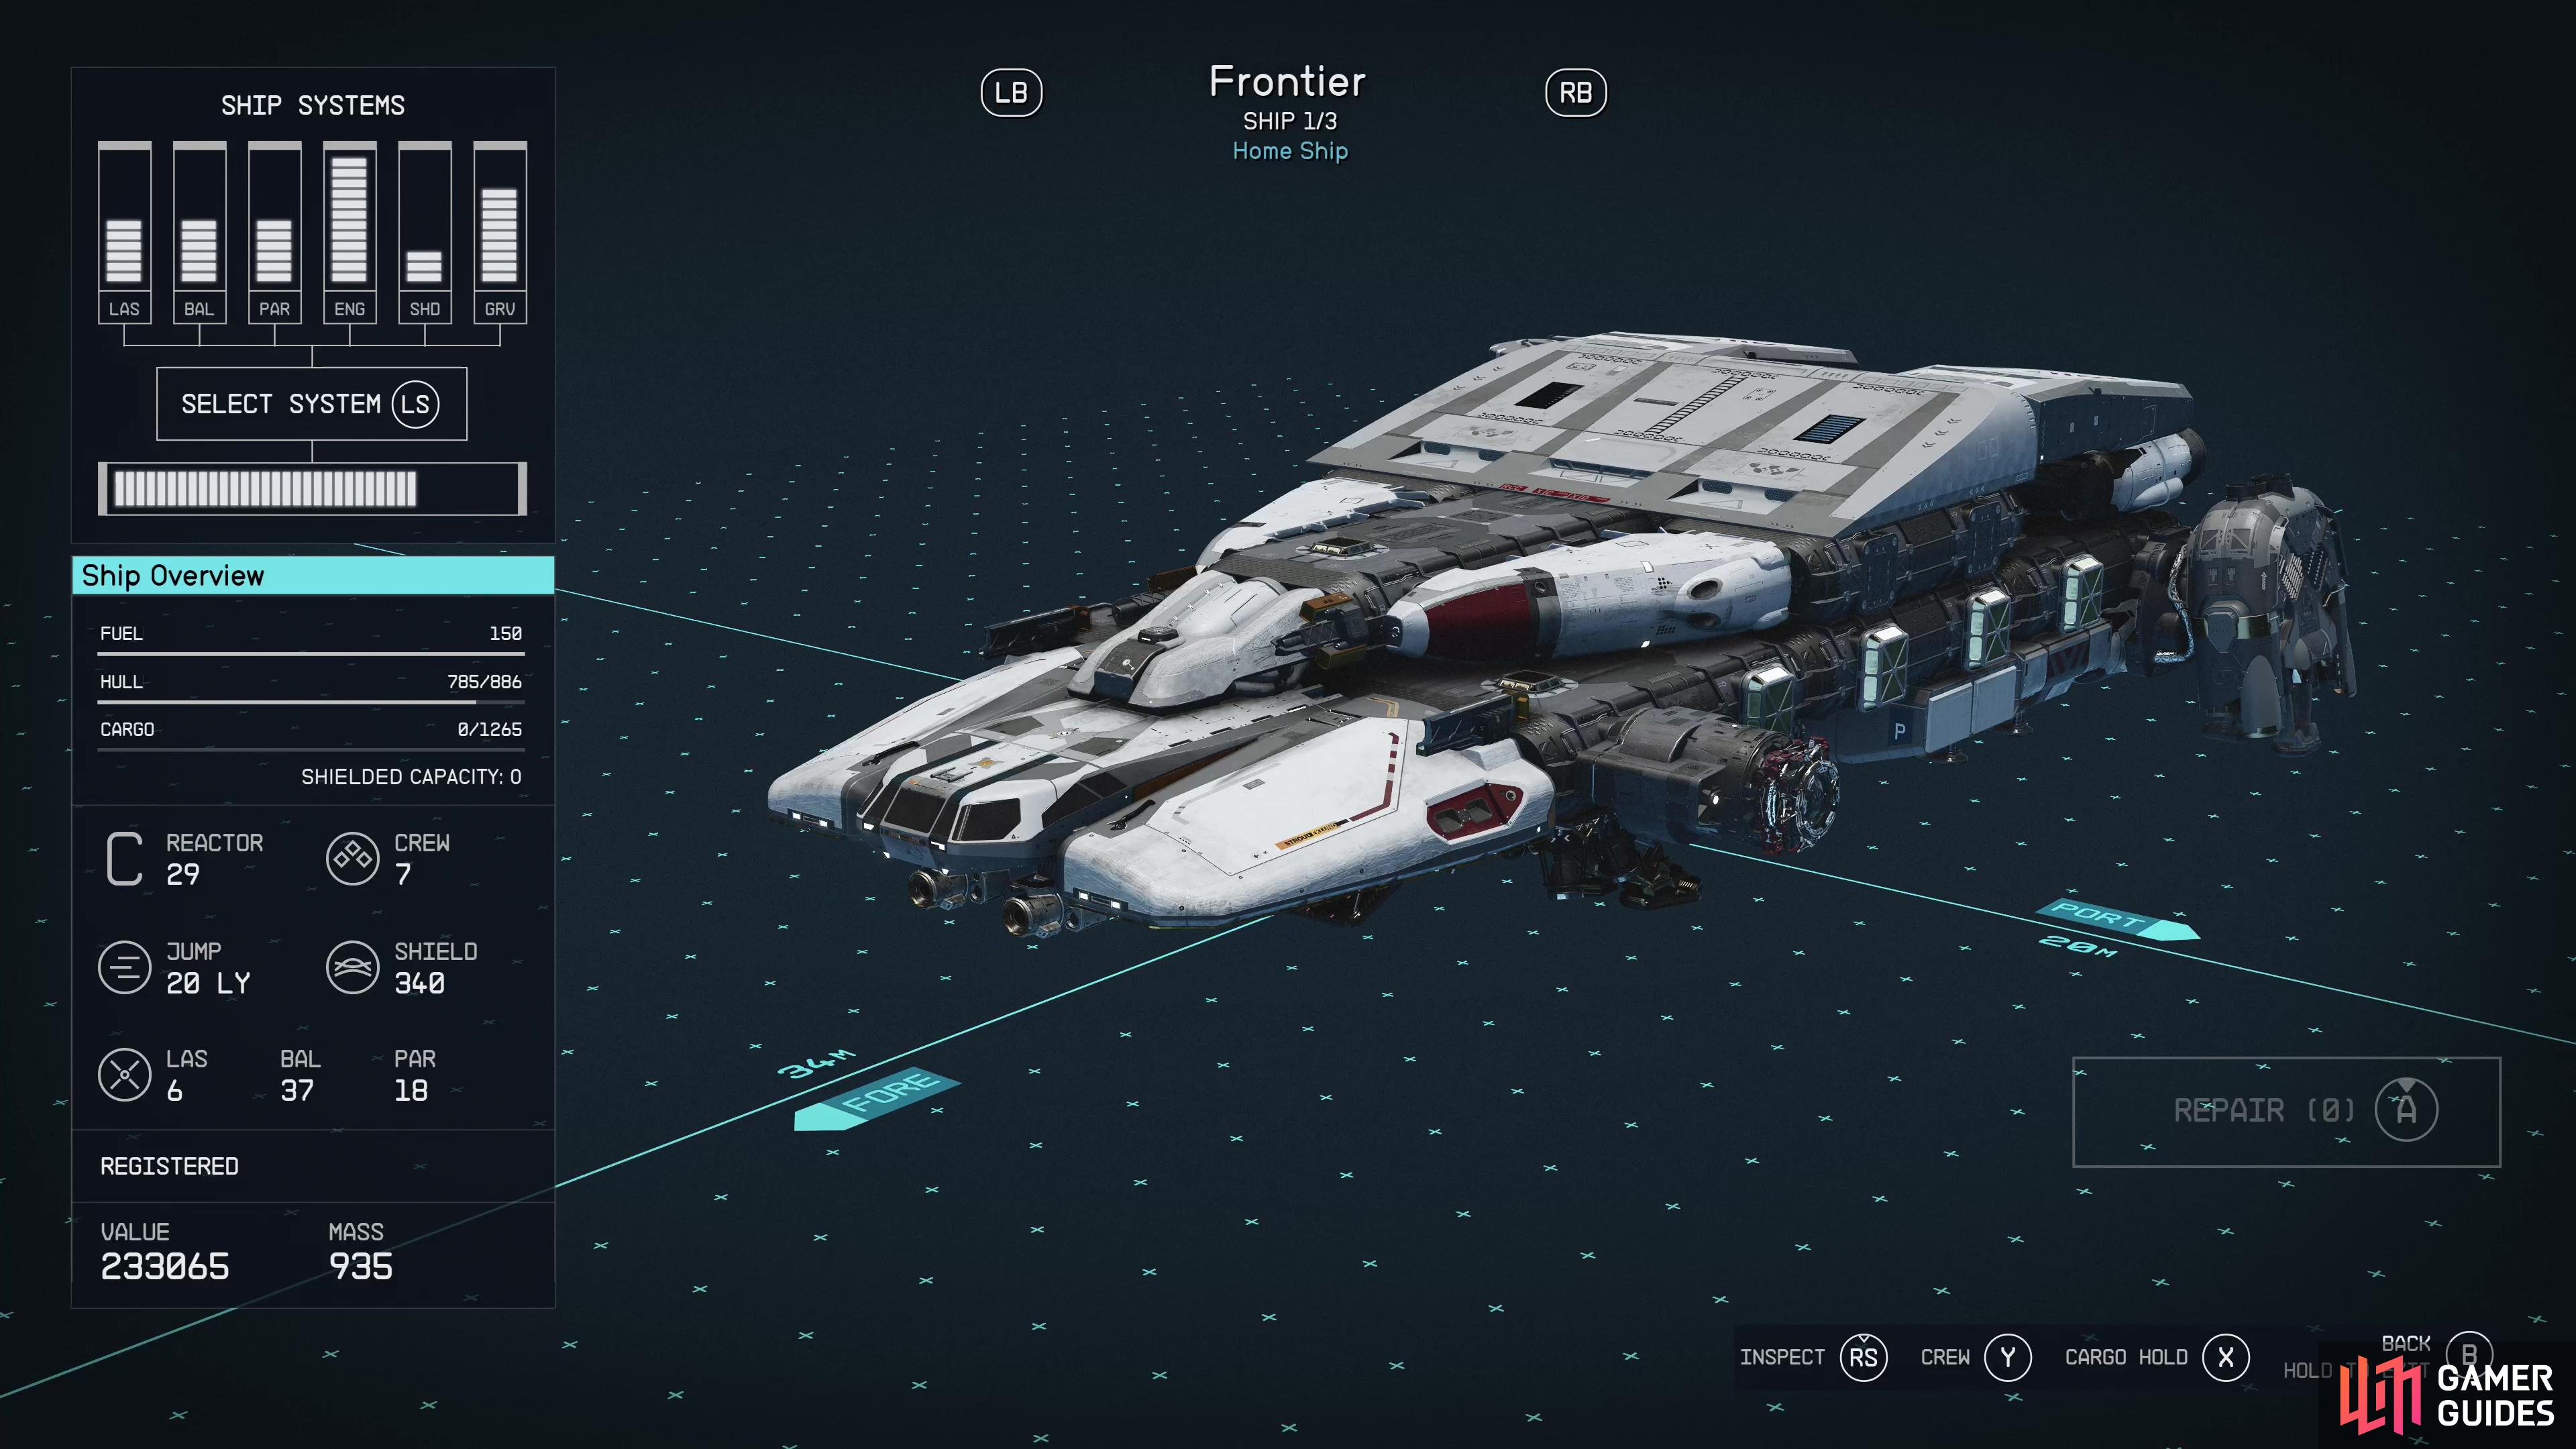 Your Ship Systems are prominently displayed on the top left of the screen, showing the max power draw of each subsytem.